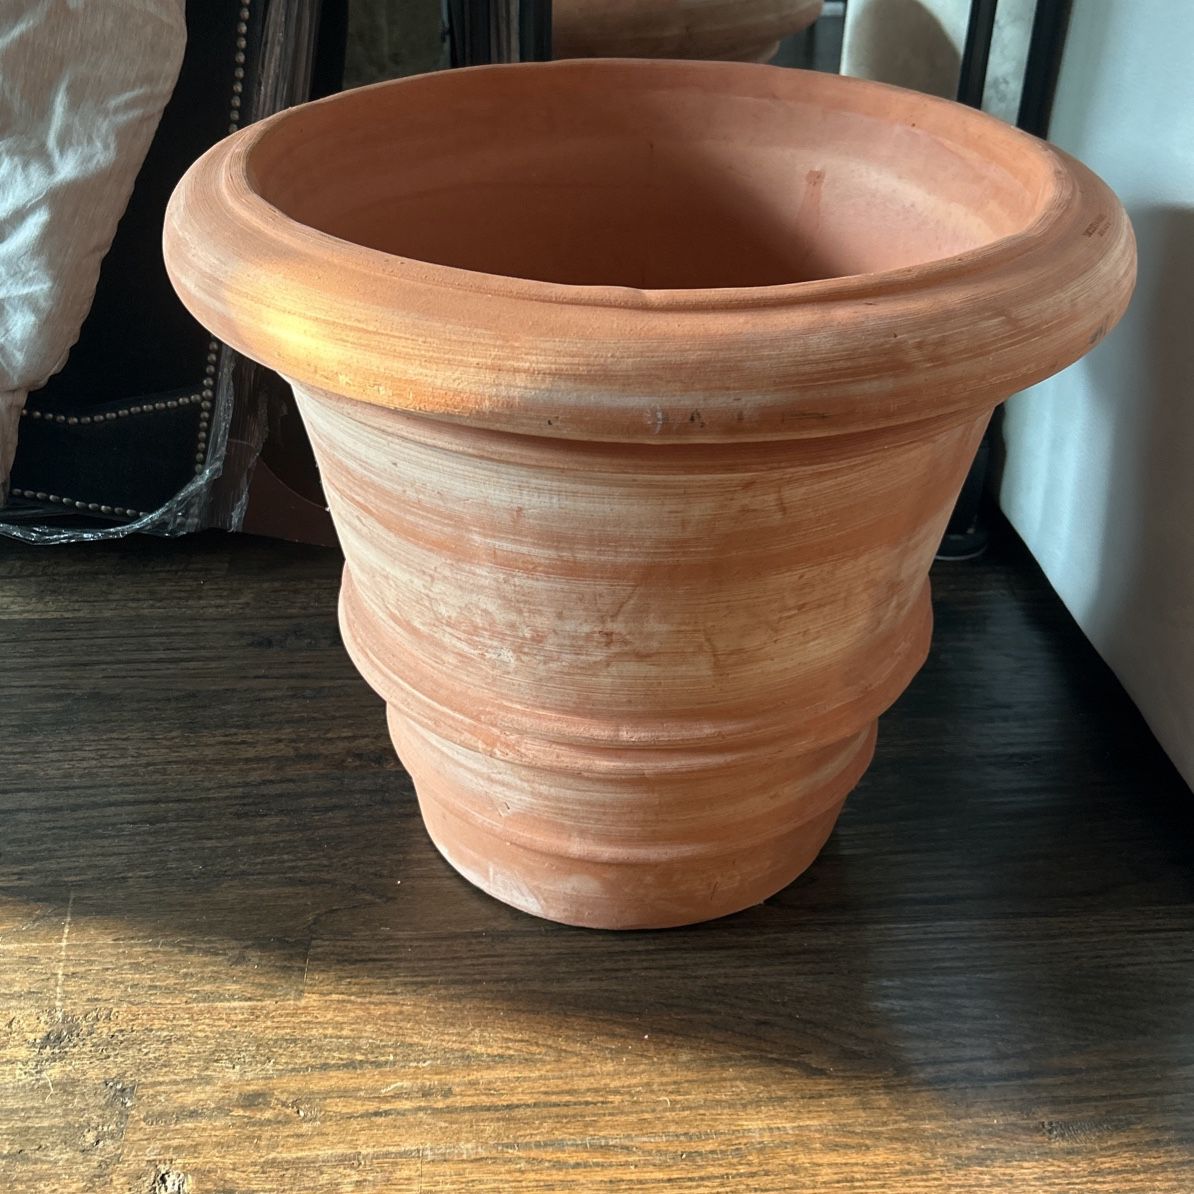 Two Clay Planter Pots